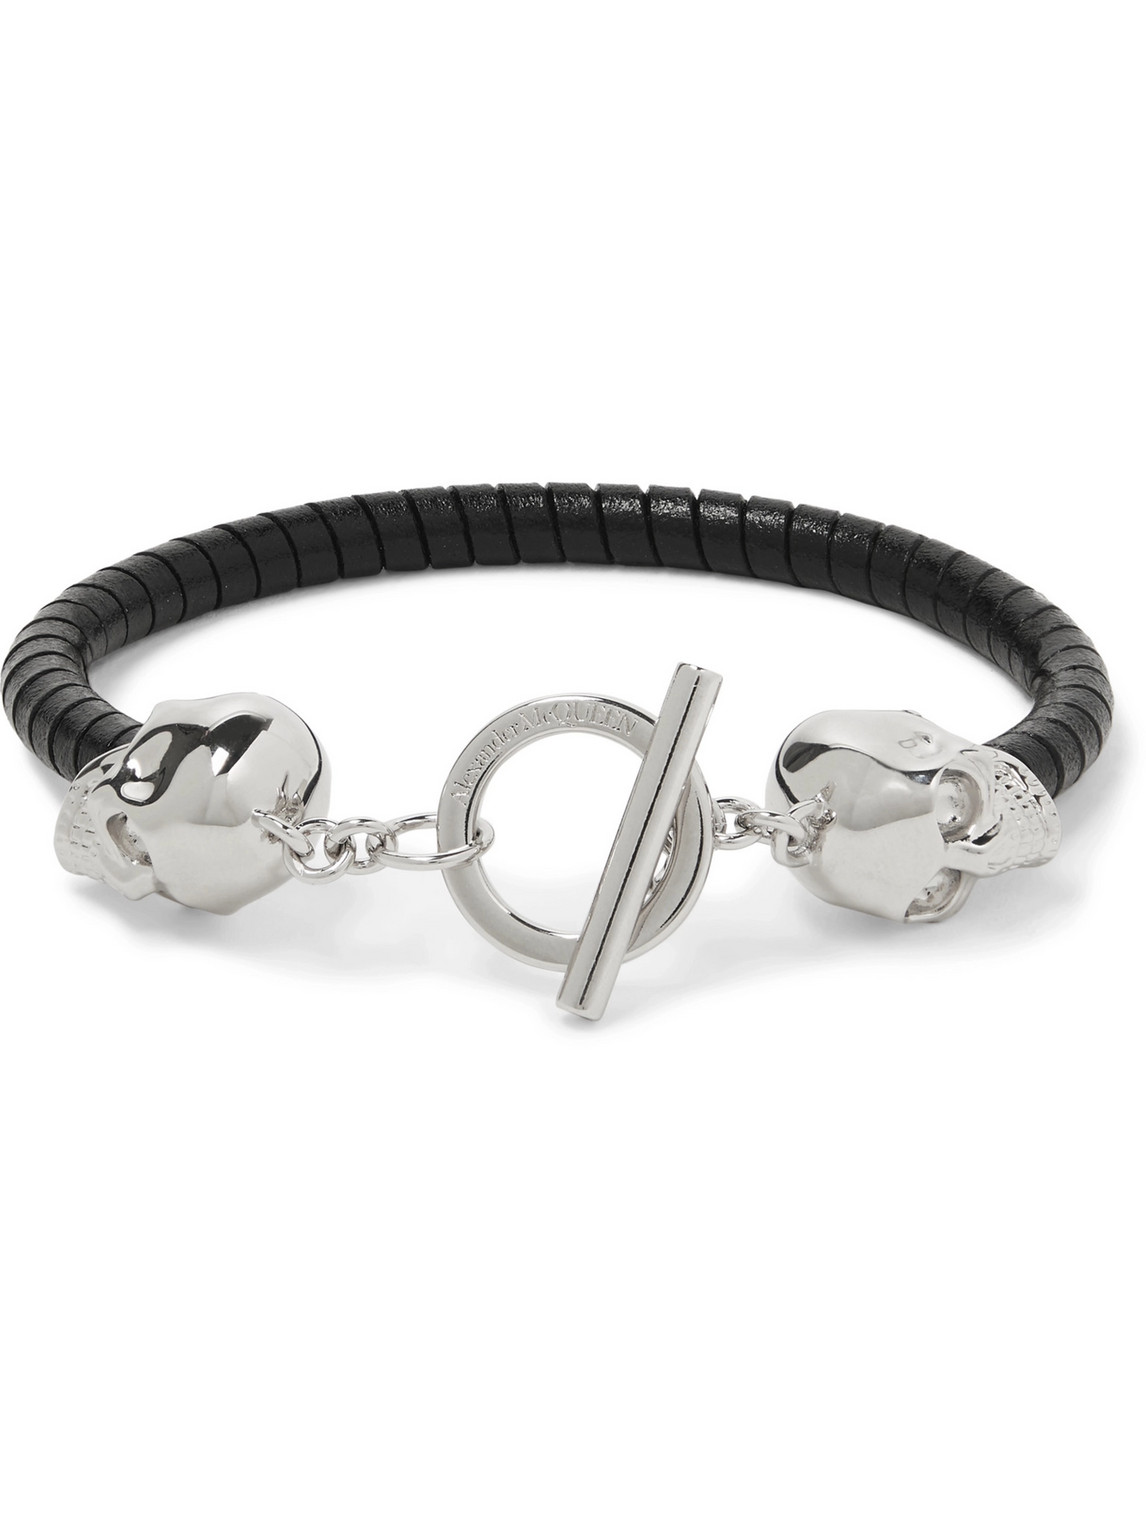 Silver-Tone and Leather Bracelet